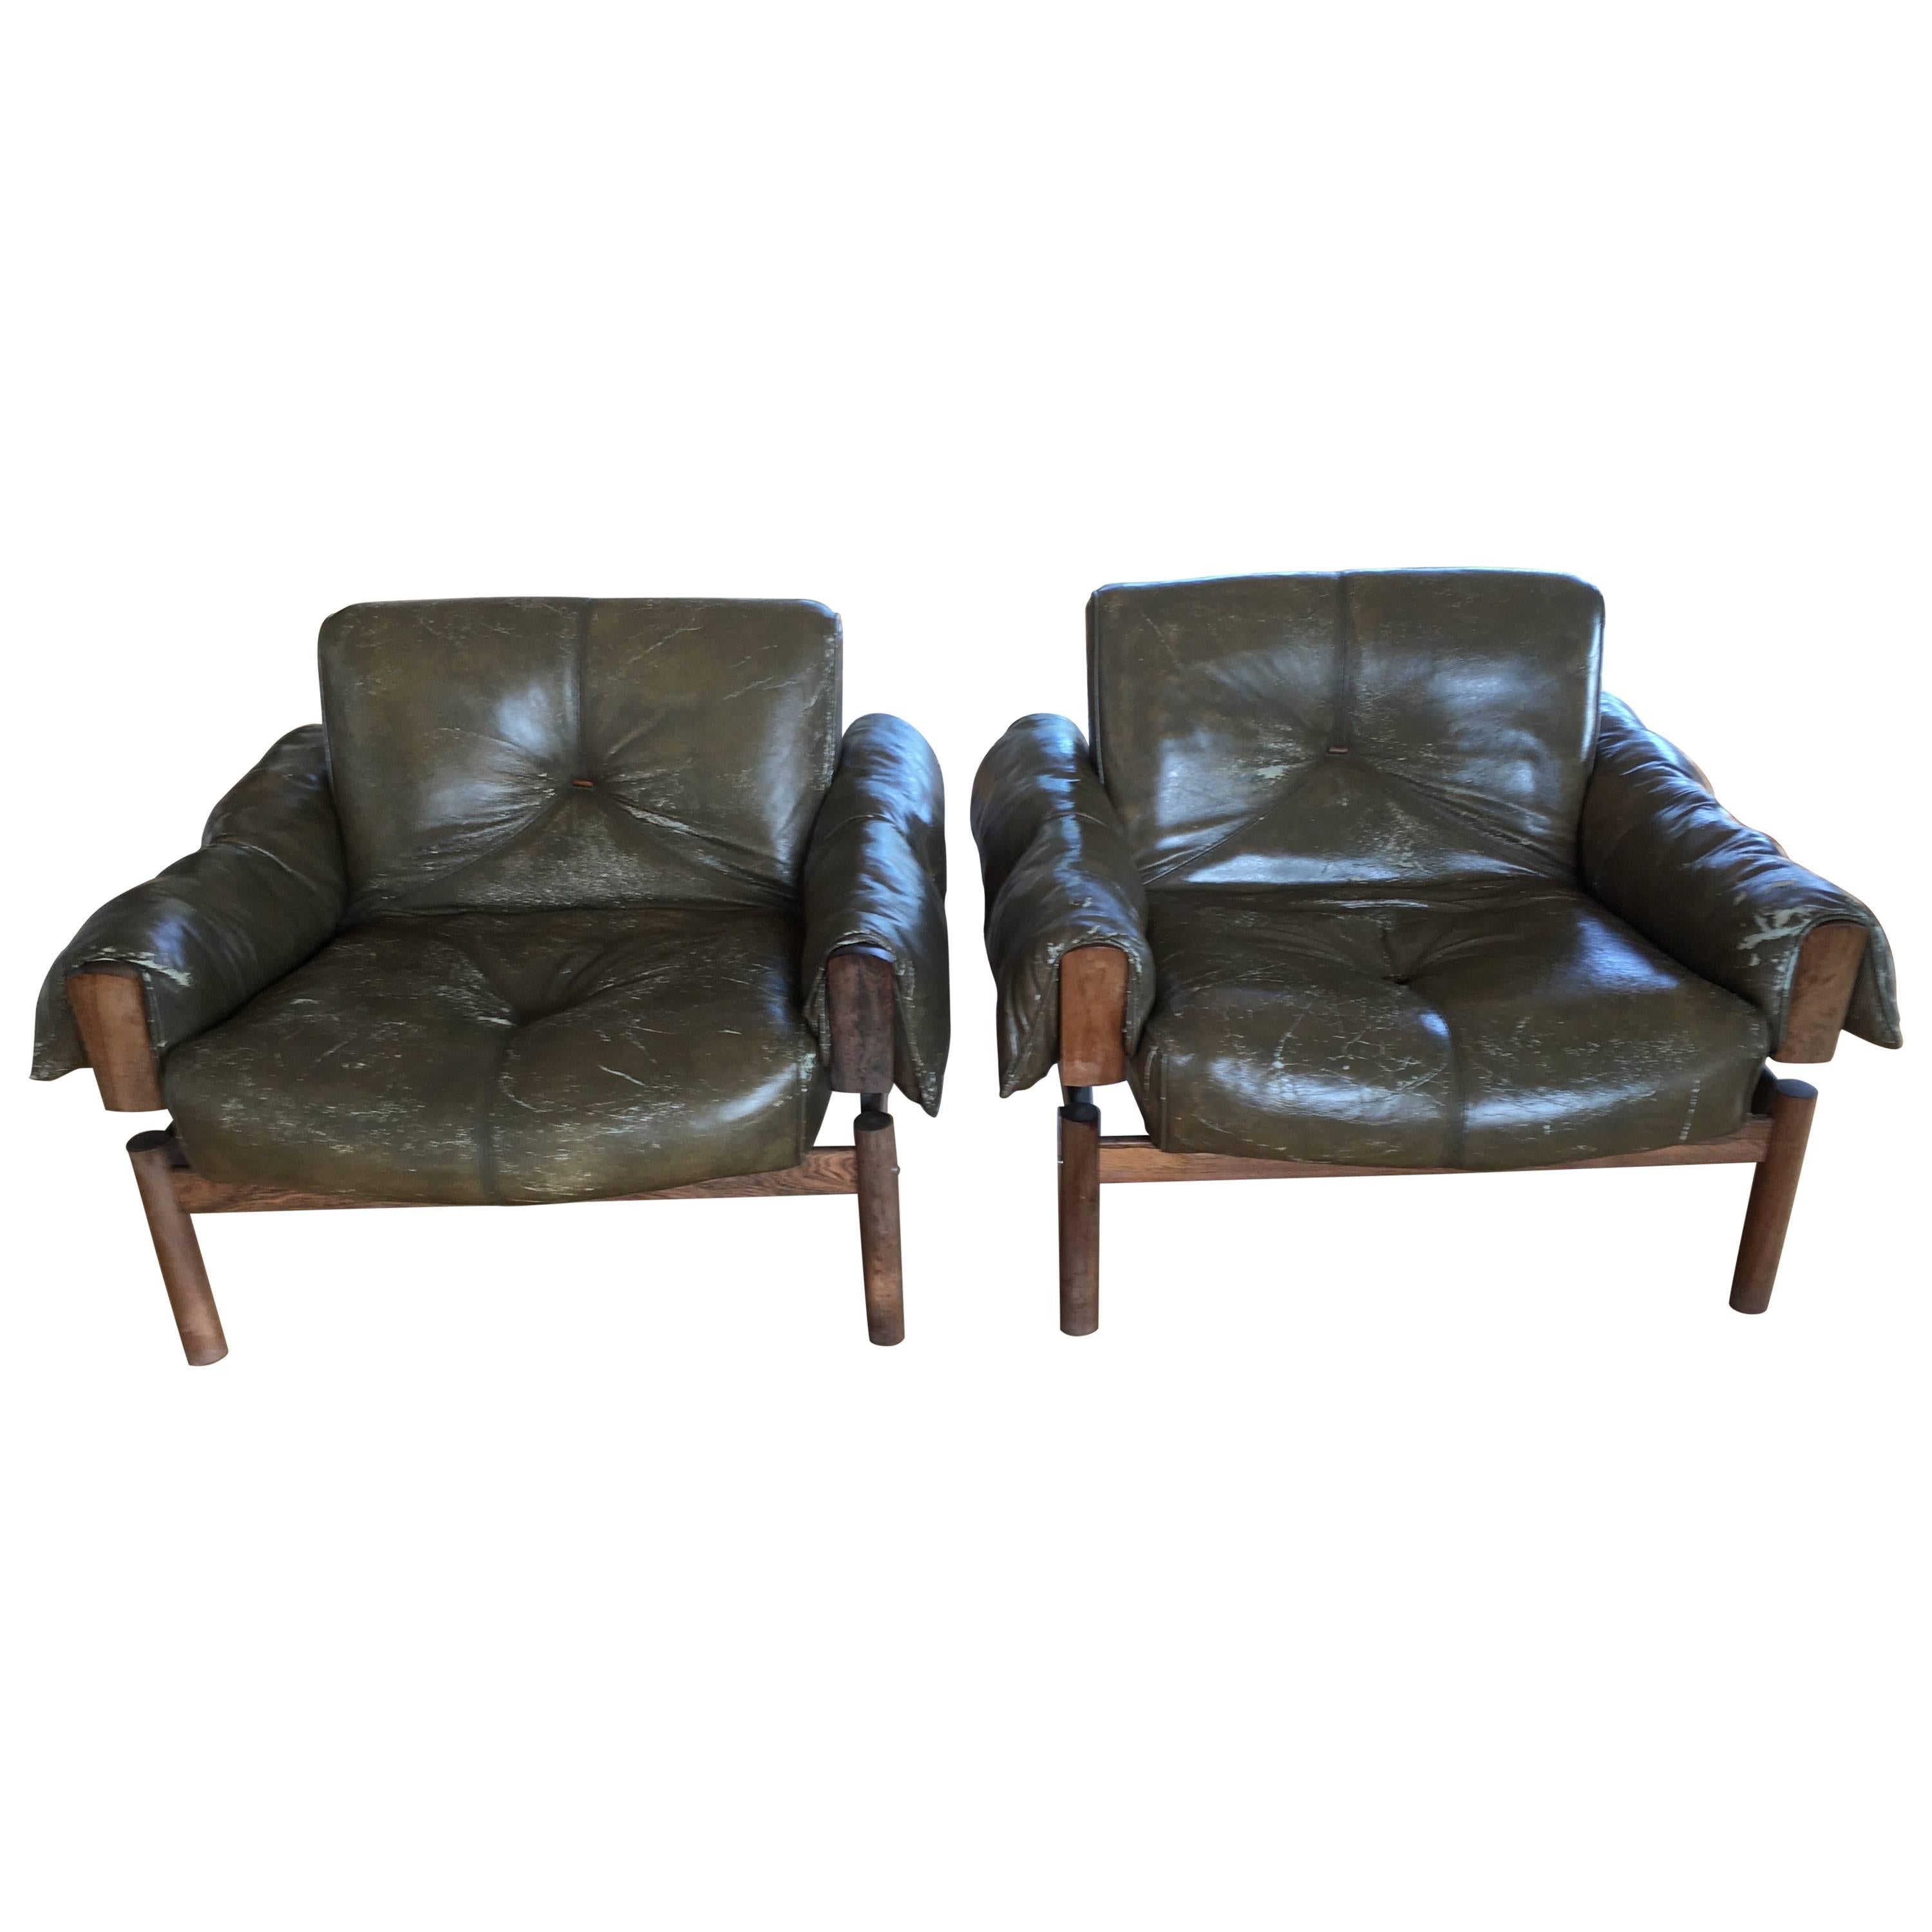 Pair of Vintage Italian Leather Lounge Chairs